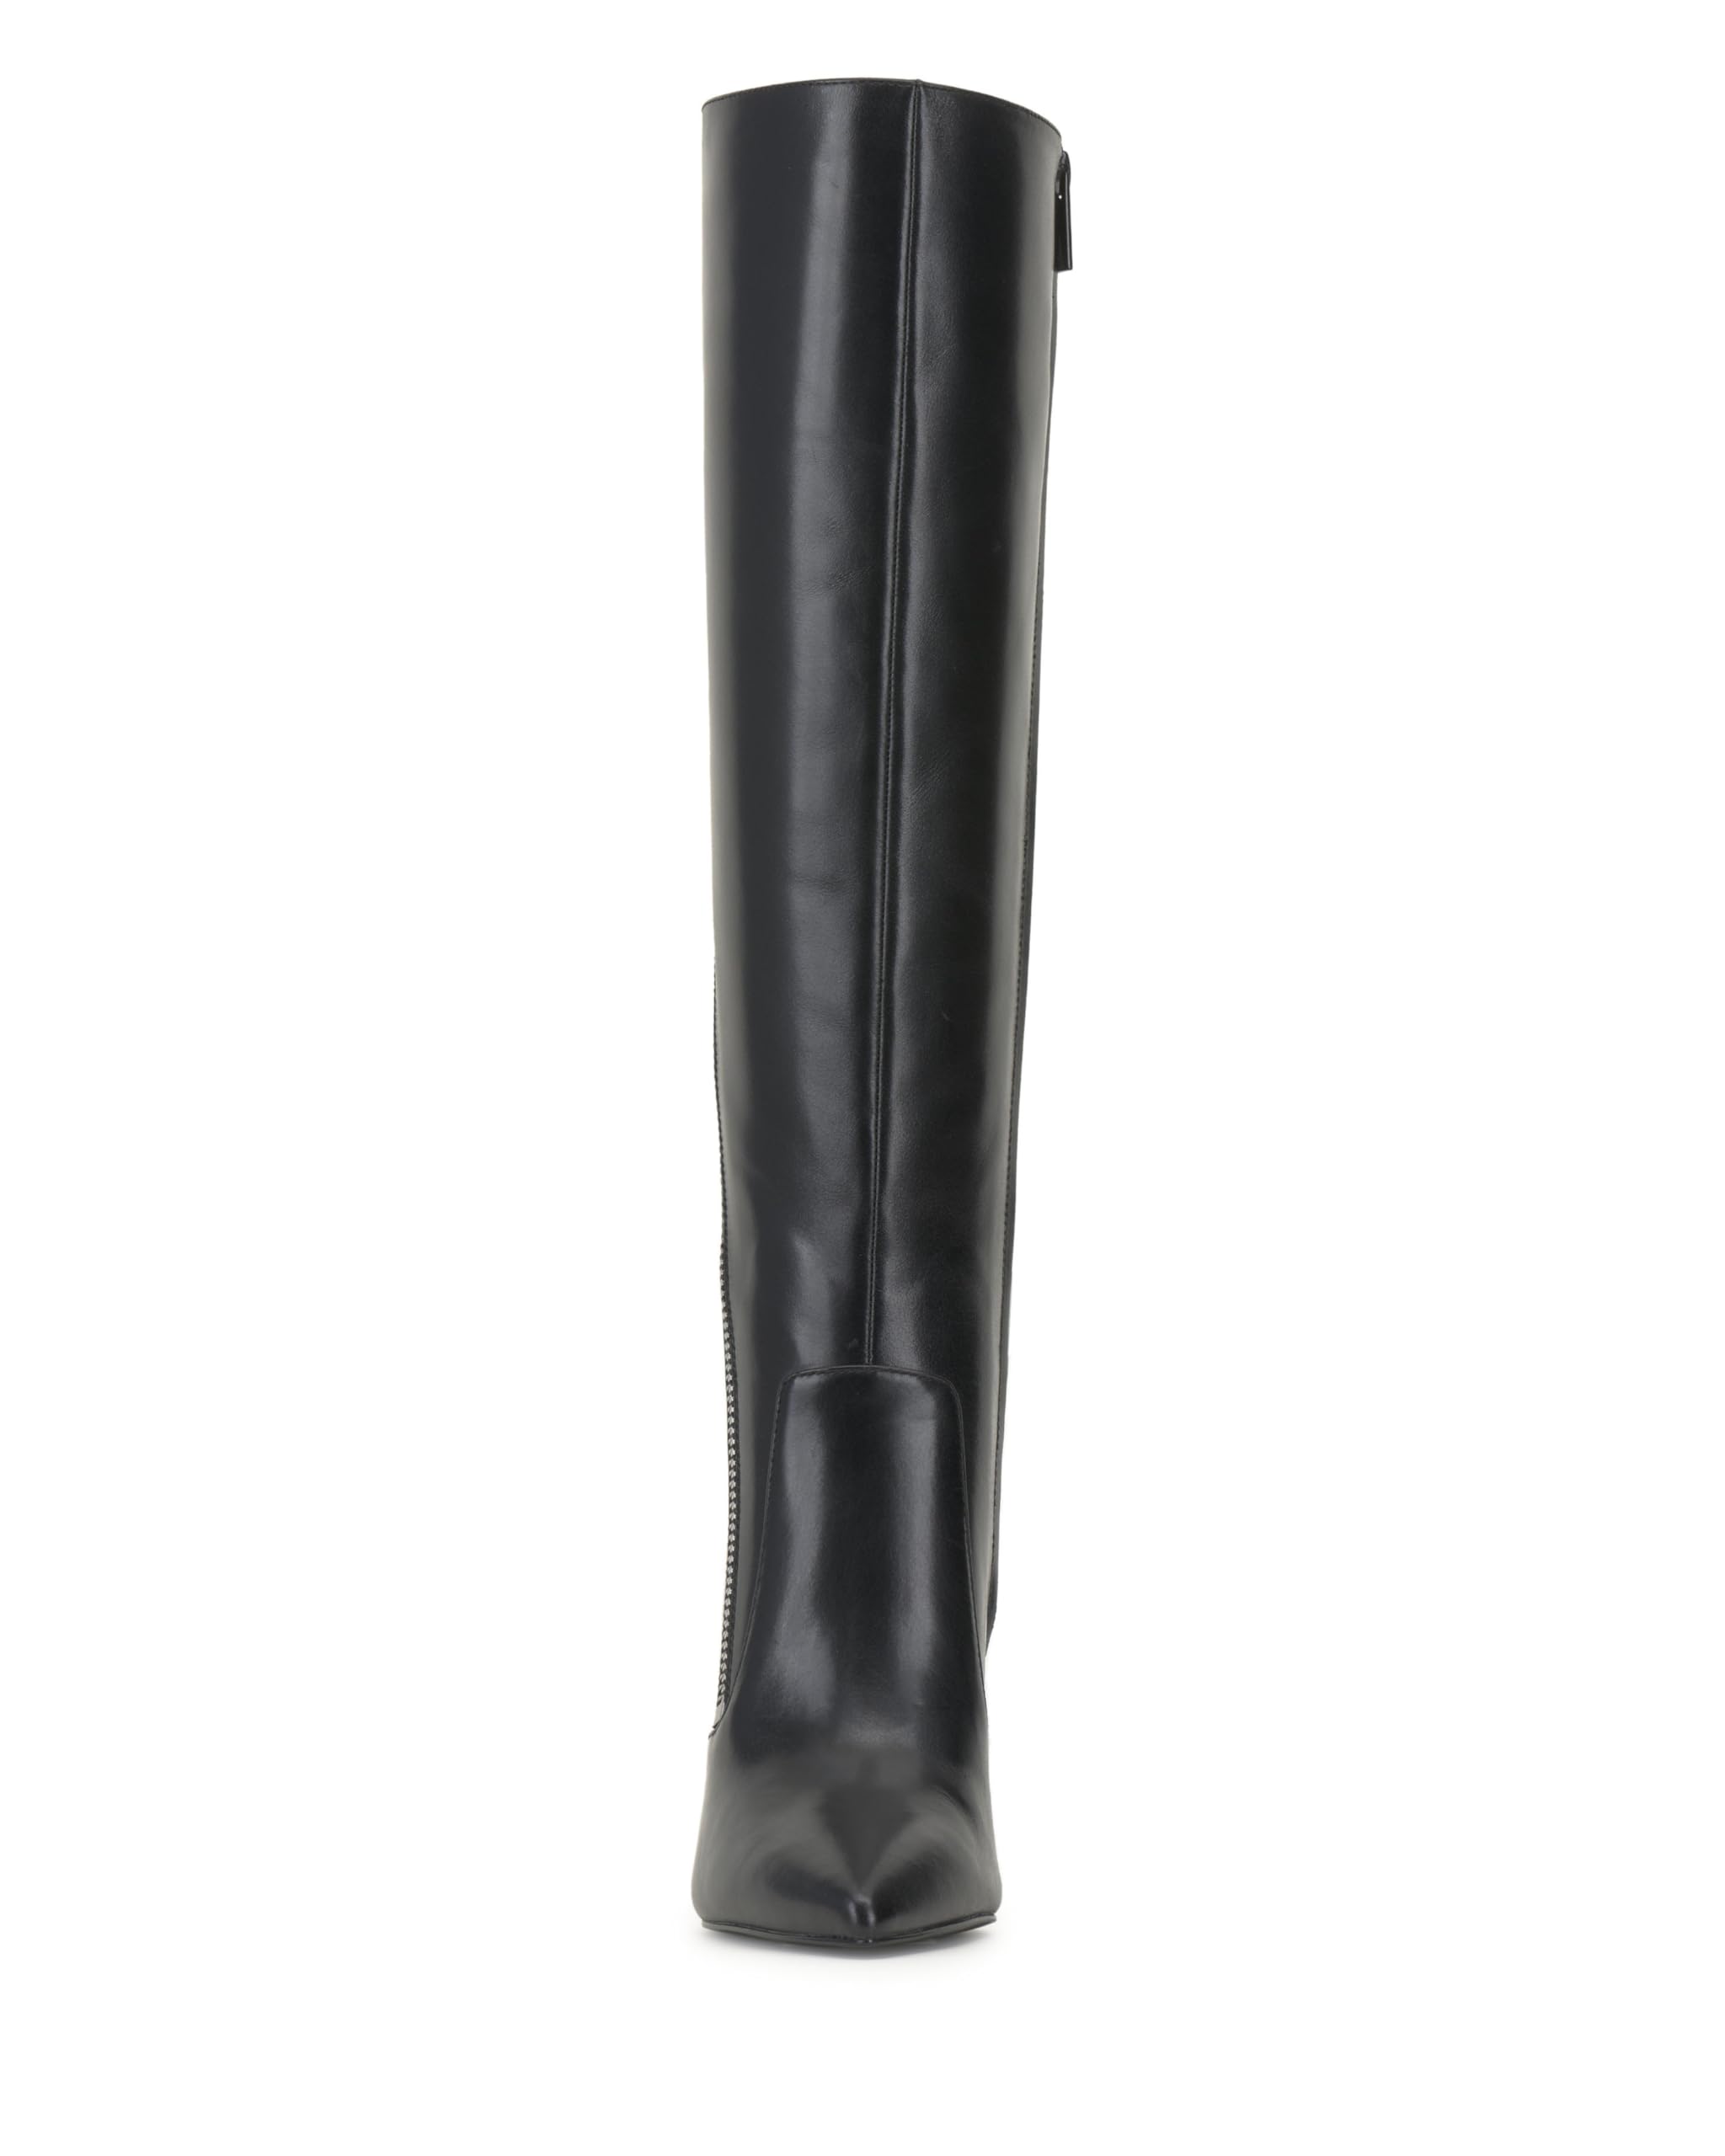 Vince Camuto Women's Alessa Knee High Boot